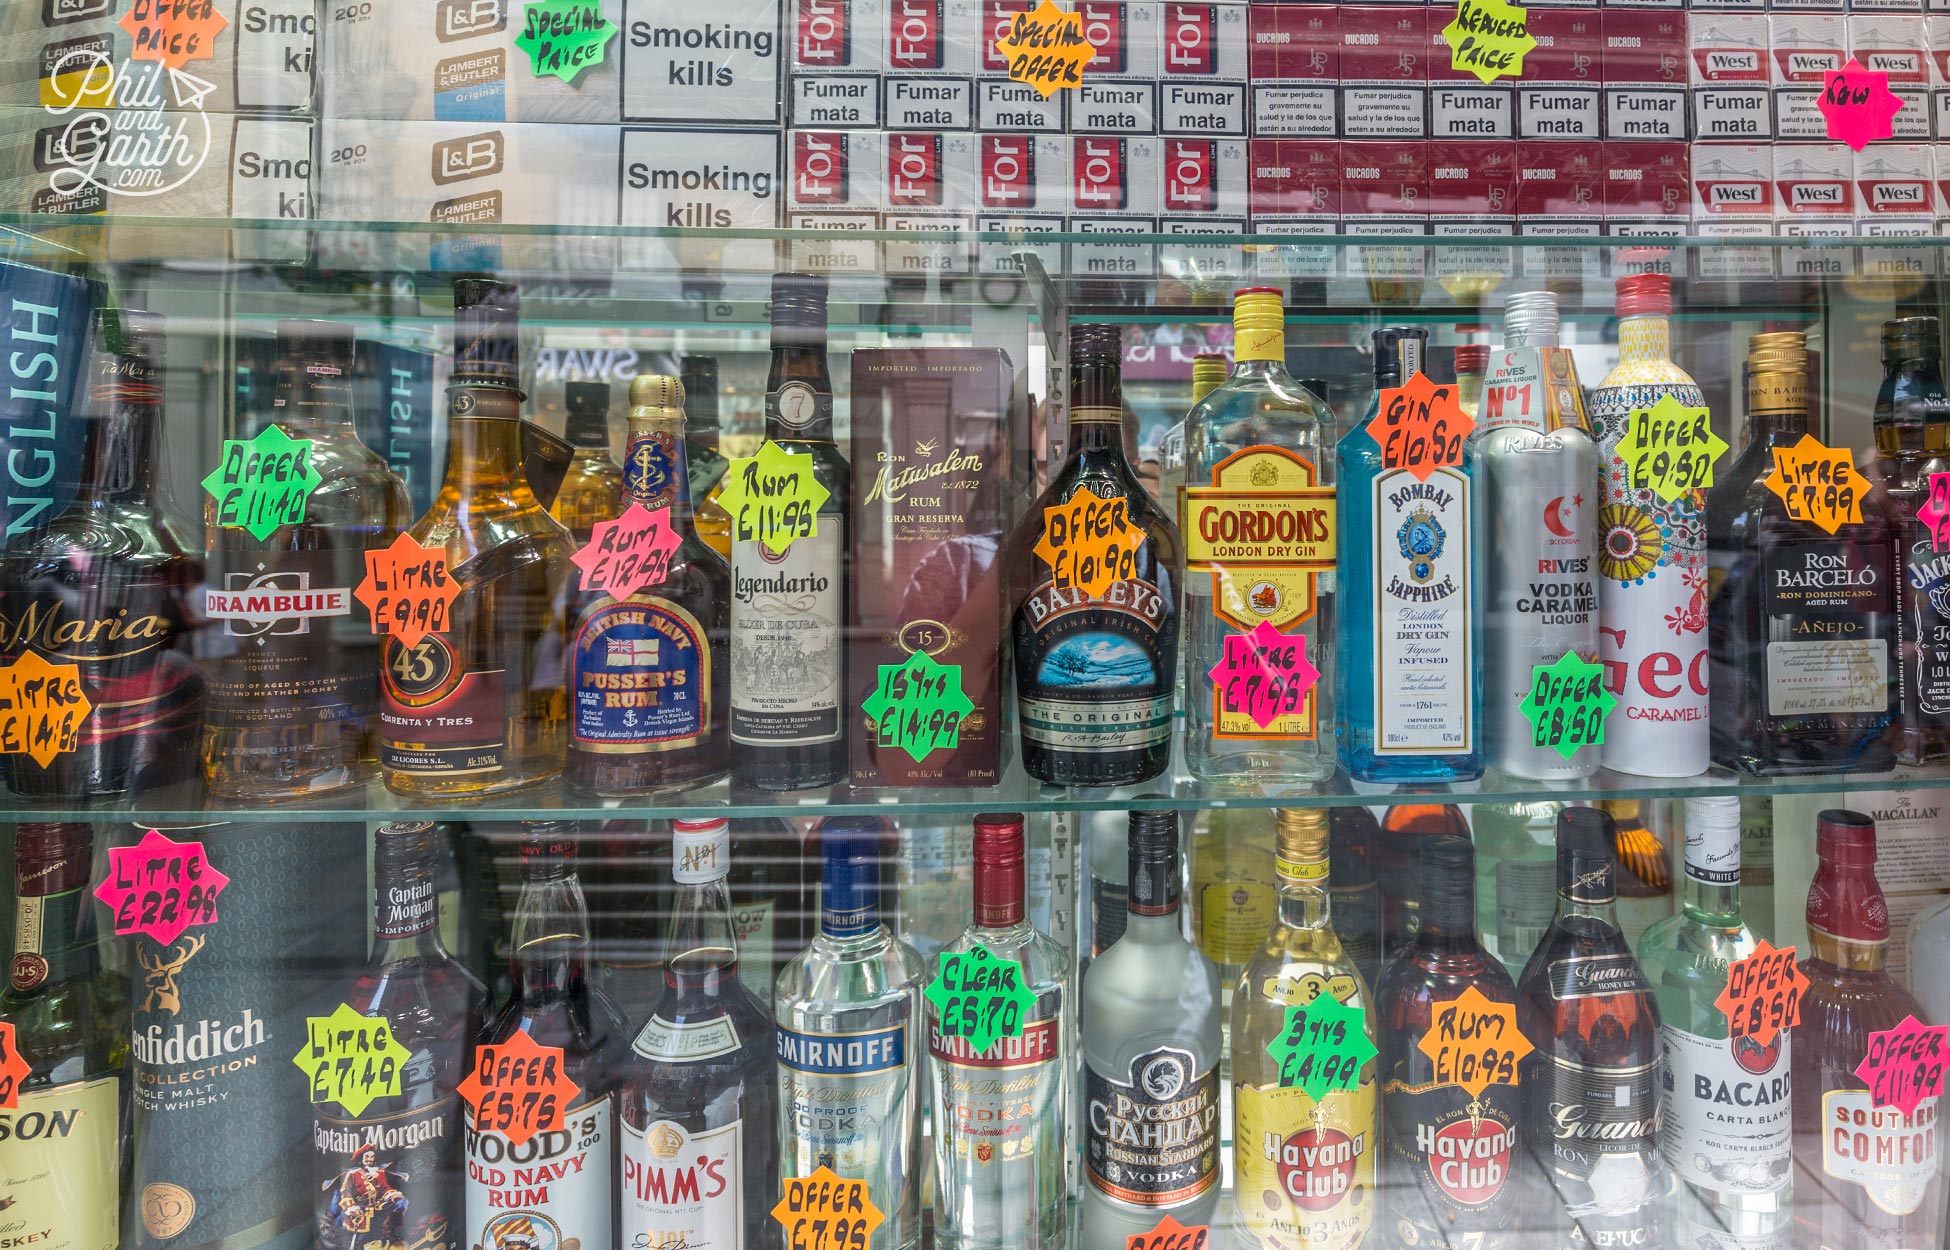 Cheap booze and fags for sale on Main Street